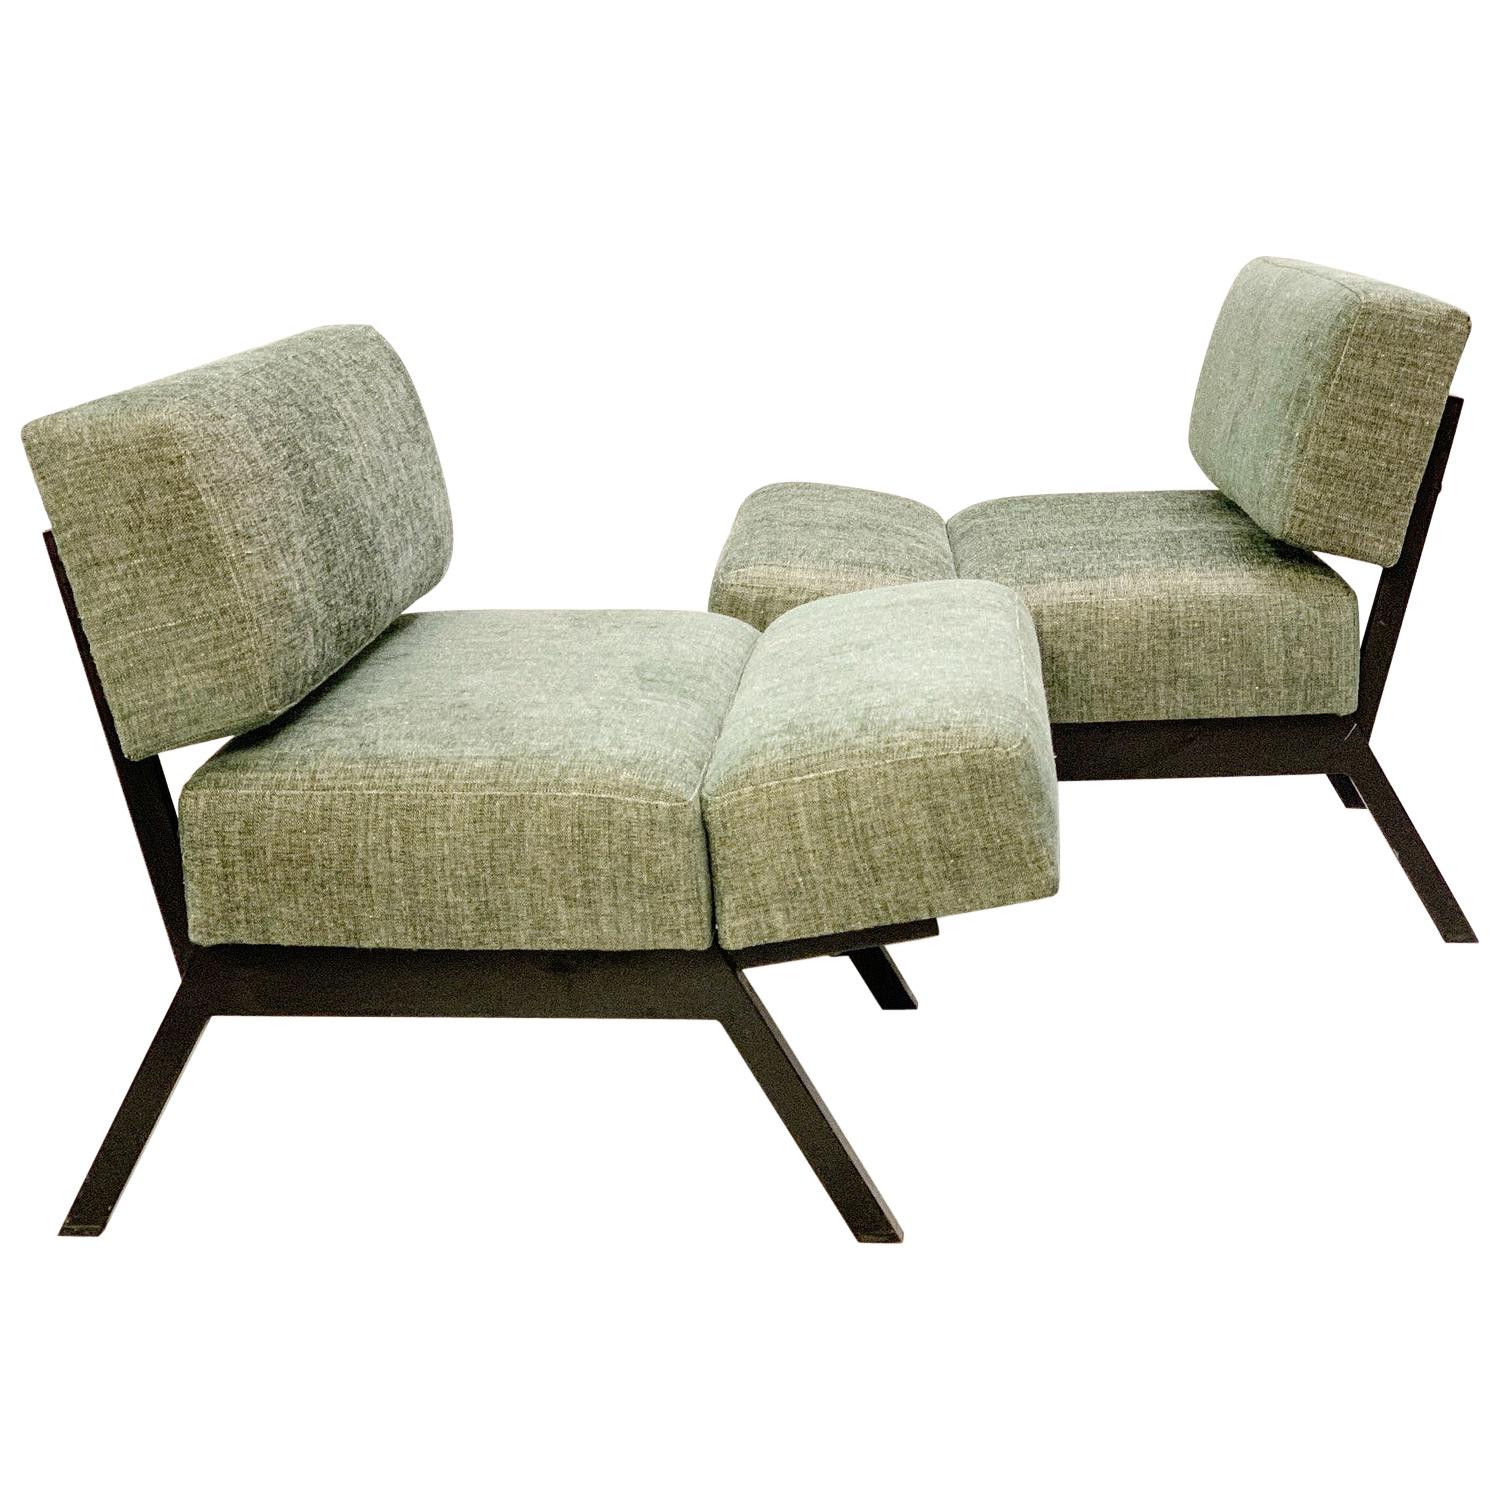 Pair of Italian "Panchetto" Reclining Chairs by IPE, New Green Upholstery